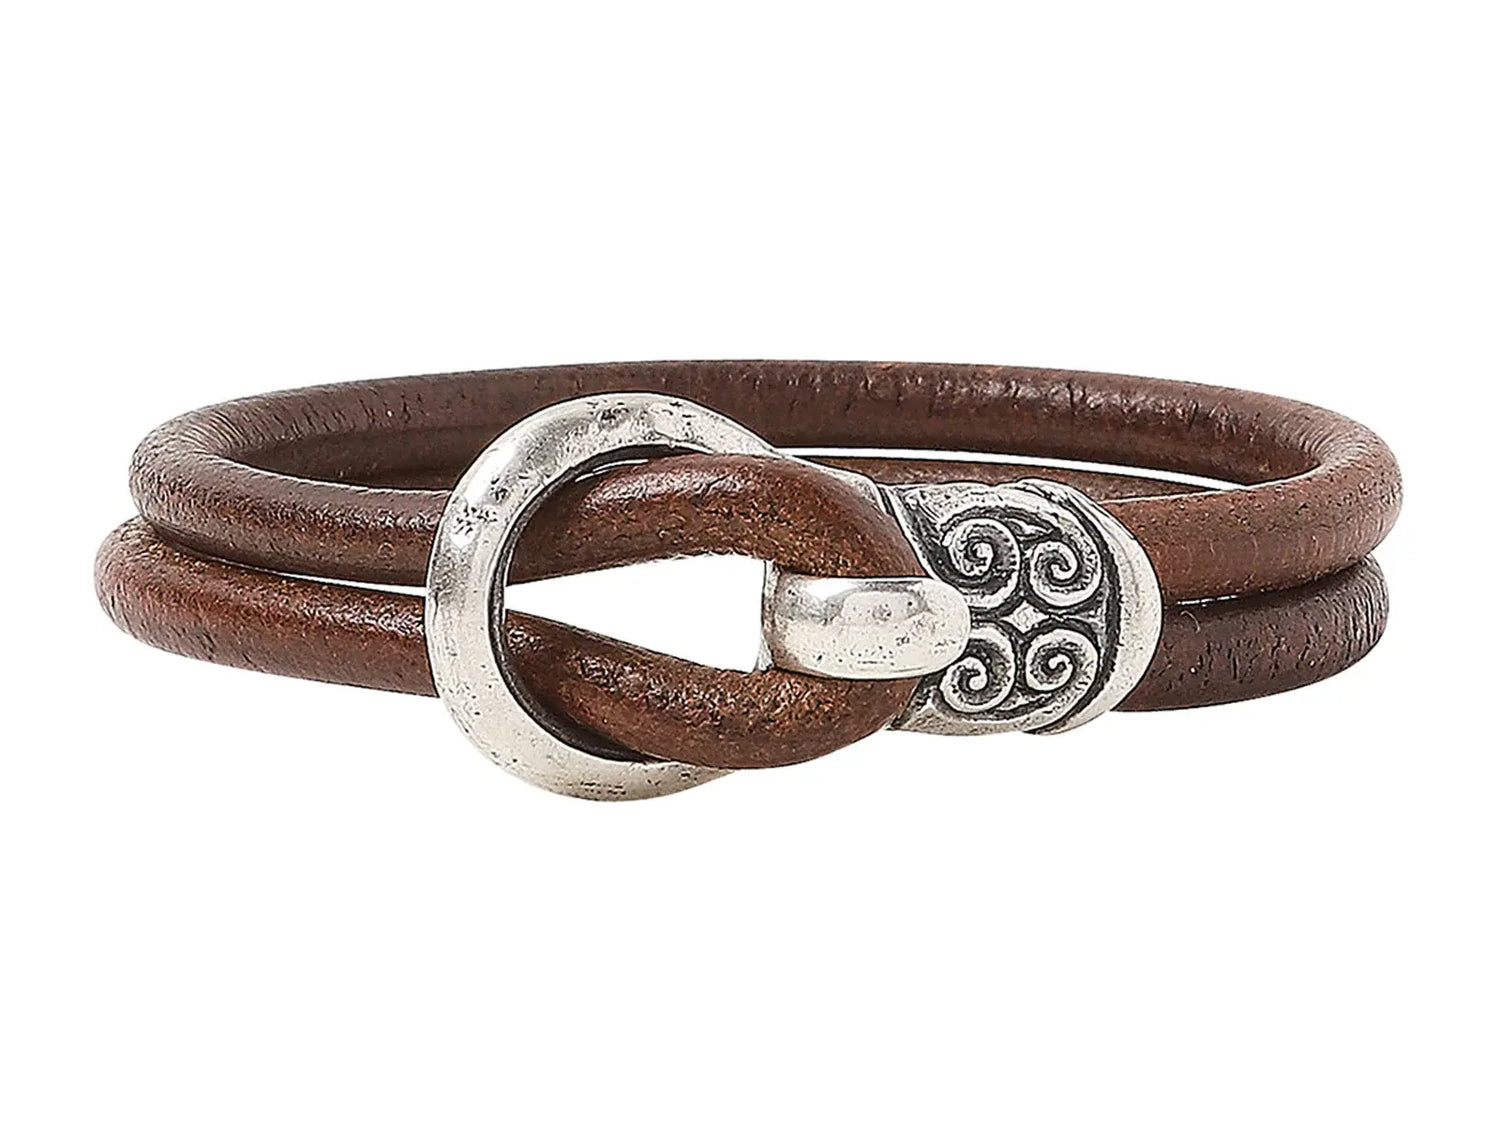 John Varvatos Leather Sterling Silver Buckle Bracelet, Large, with No Stone - Squash Blossom Vail